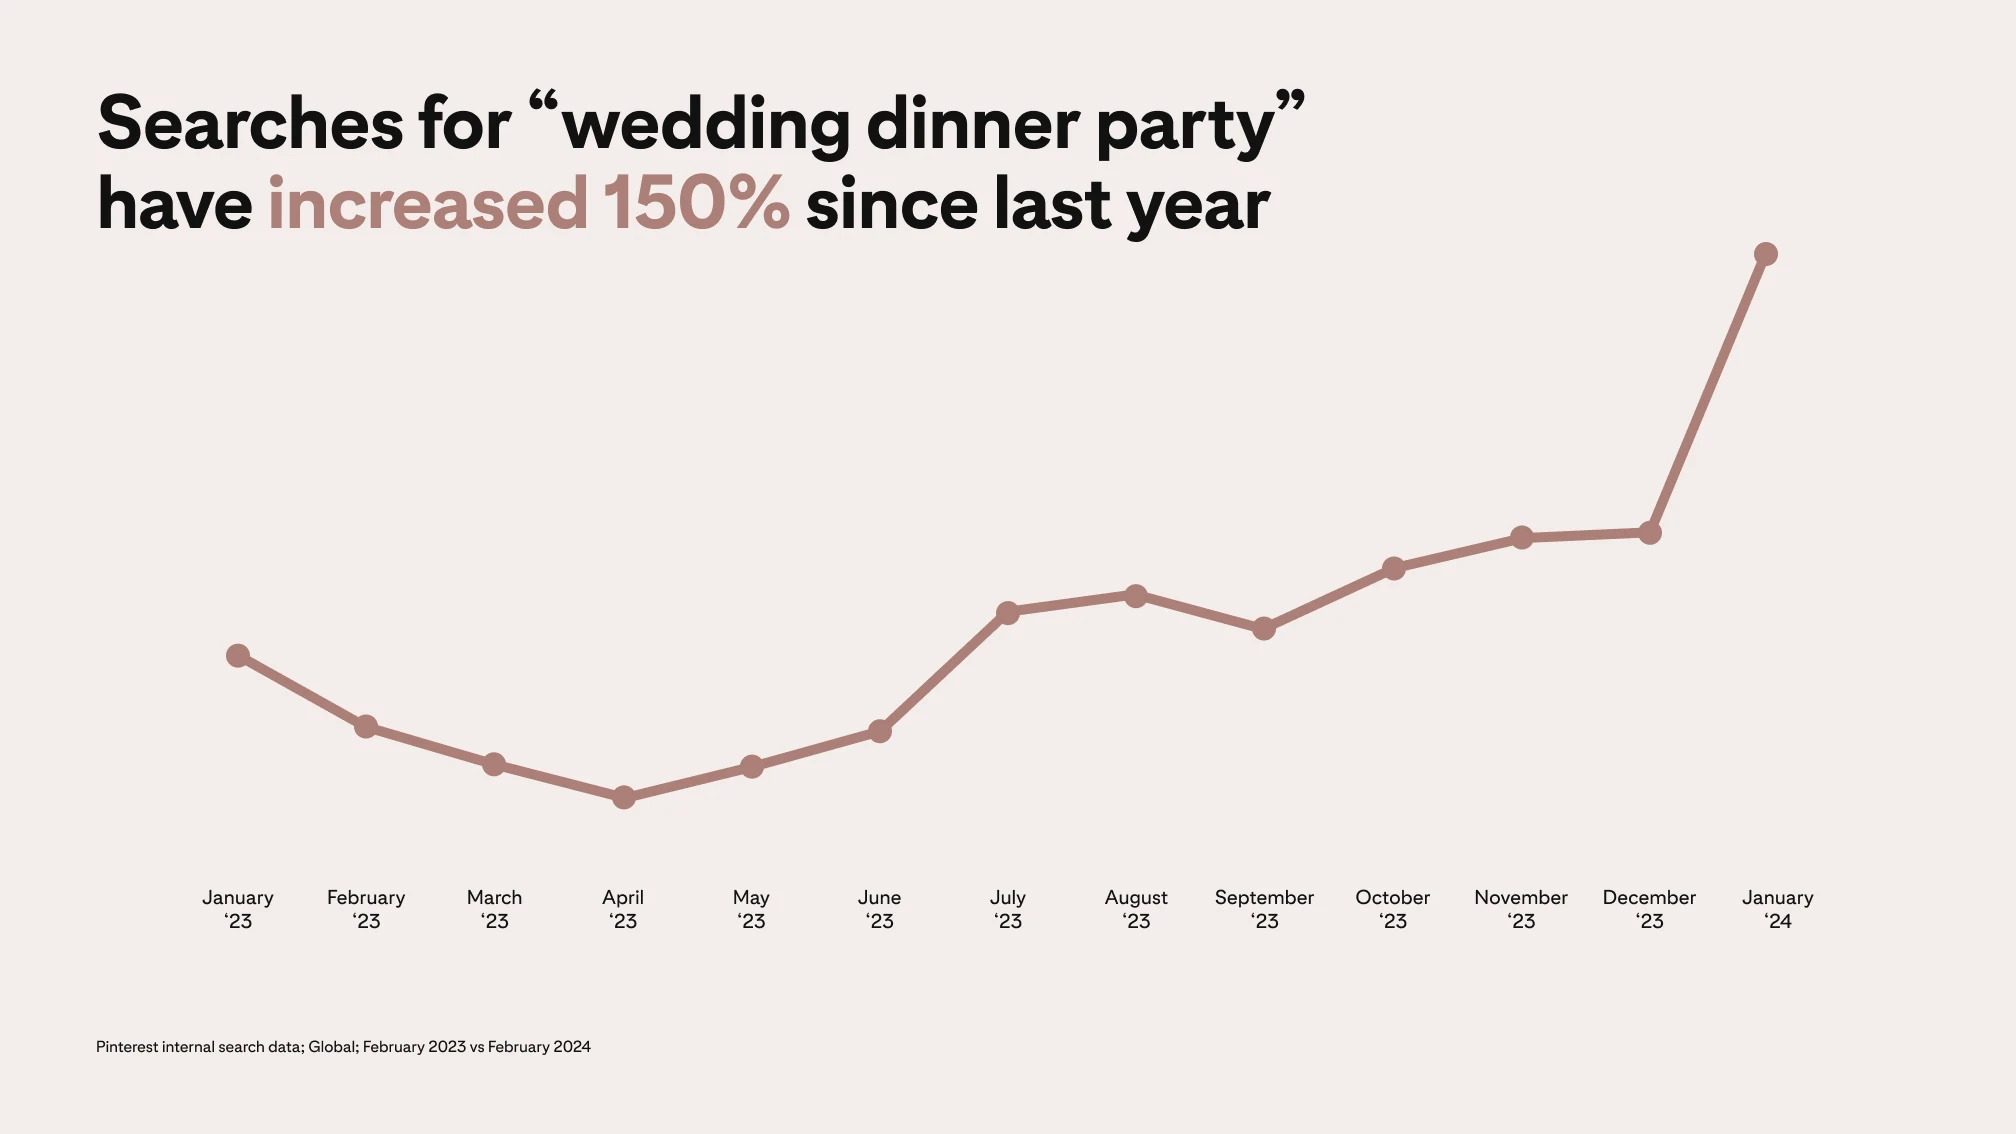 A line graph shows that Pinterest searches for "wedding dinner party" have increased 150% since last year